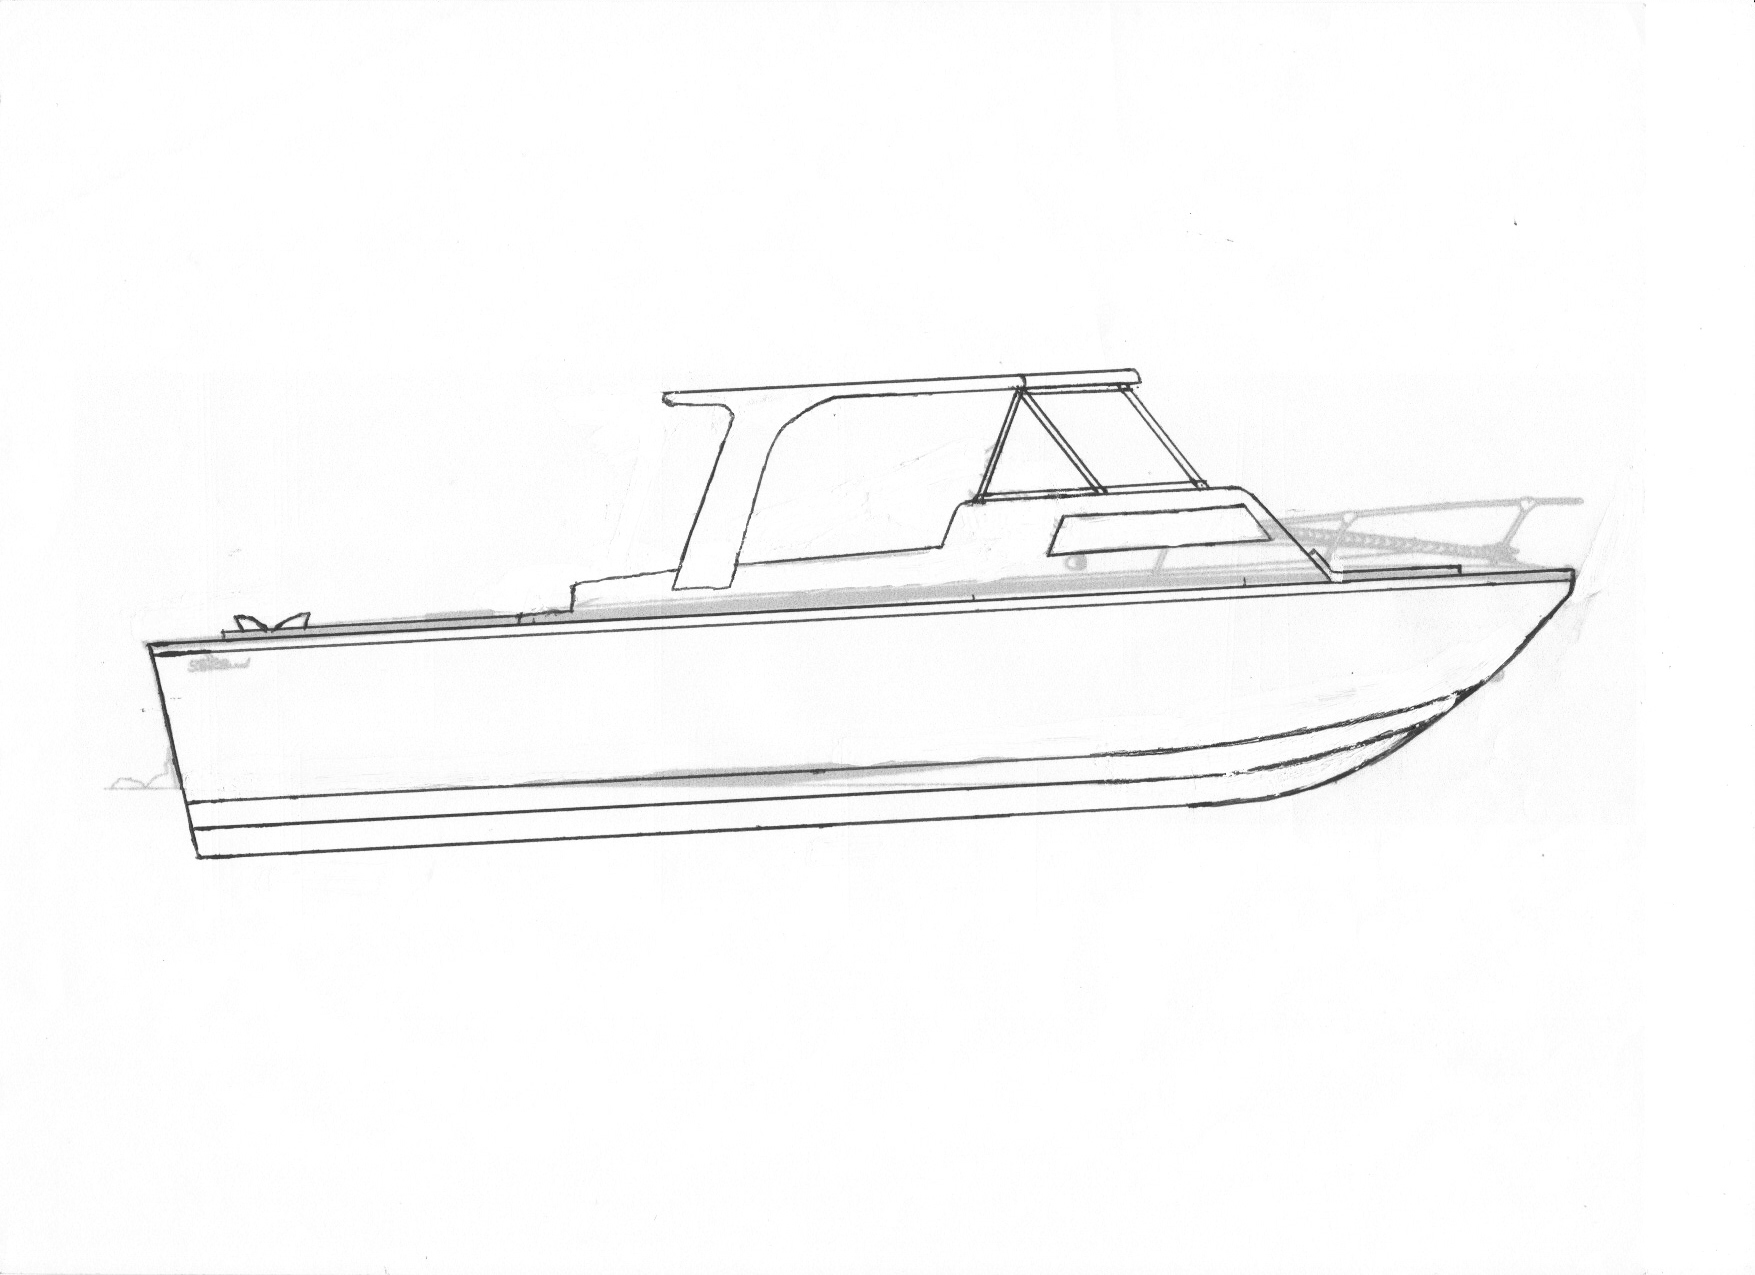 How to draw a realistic sailboat Cedar lake boats